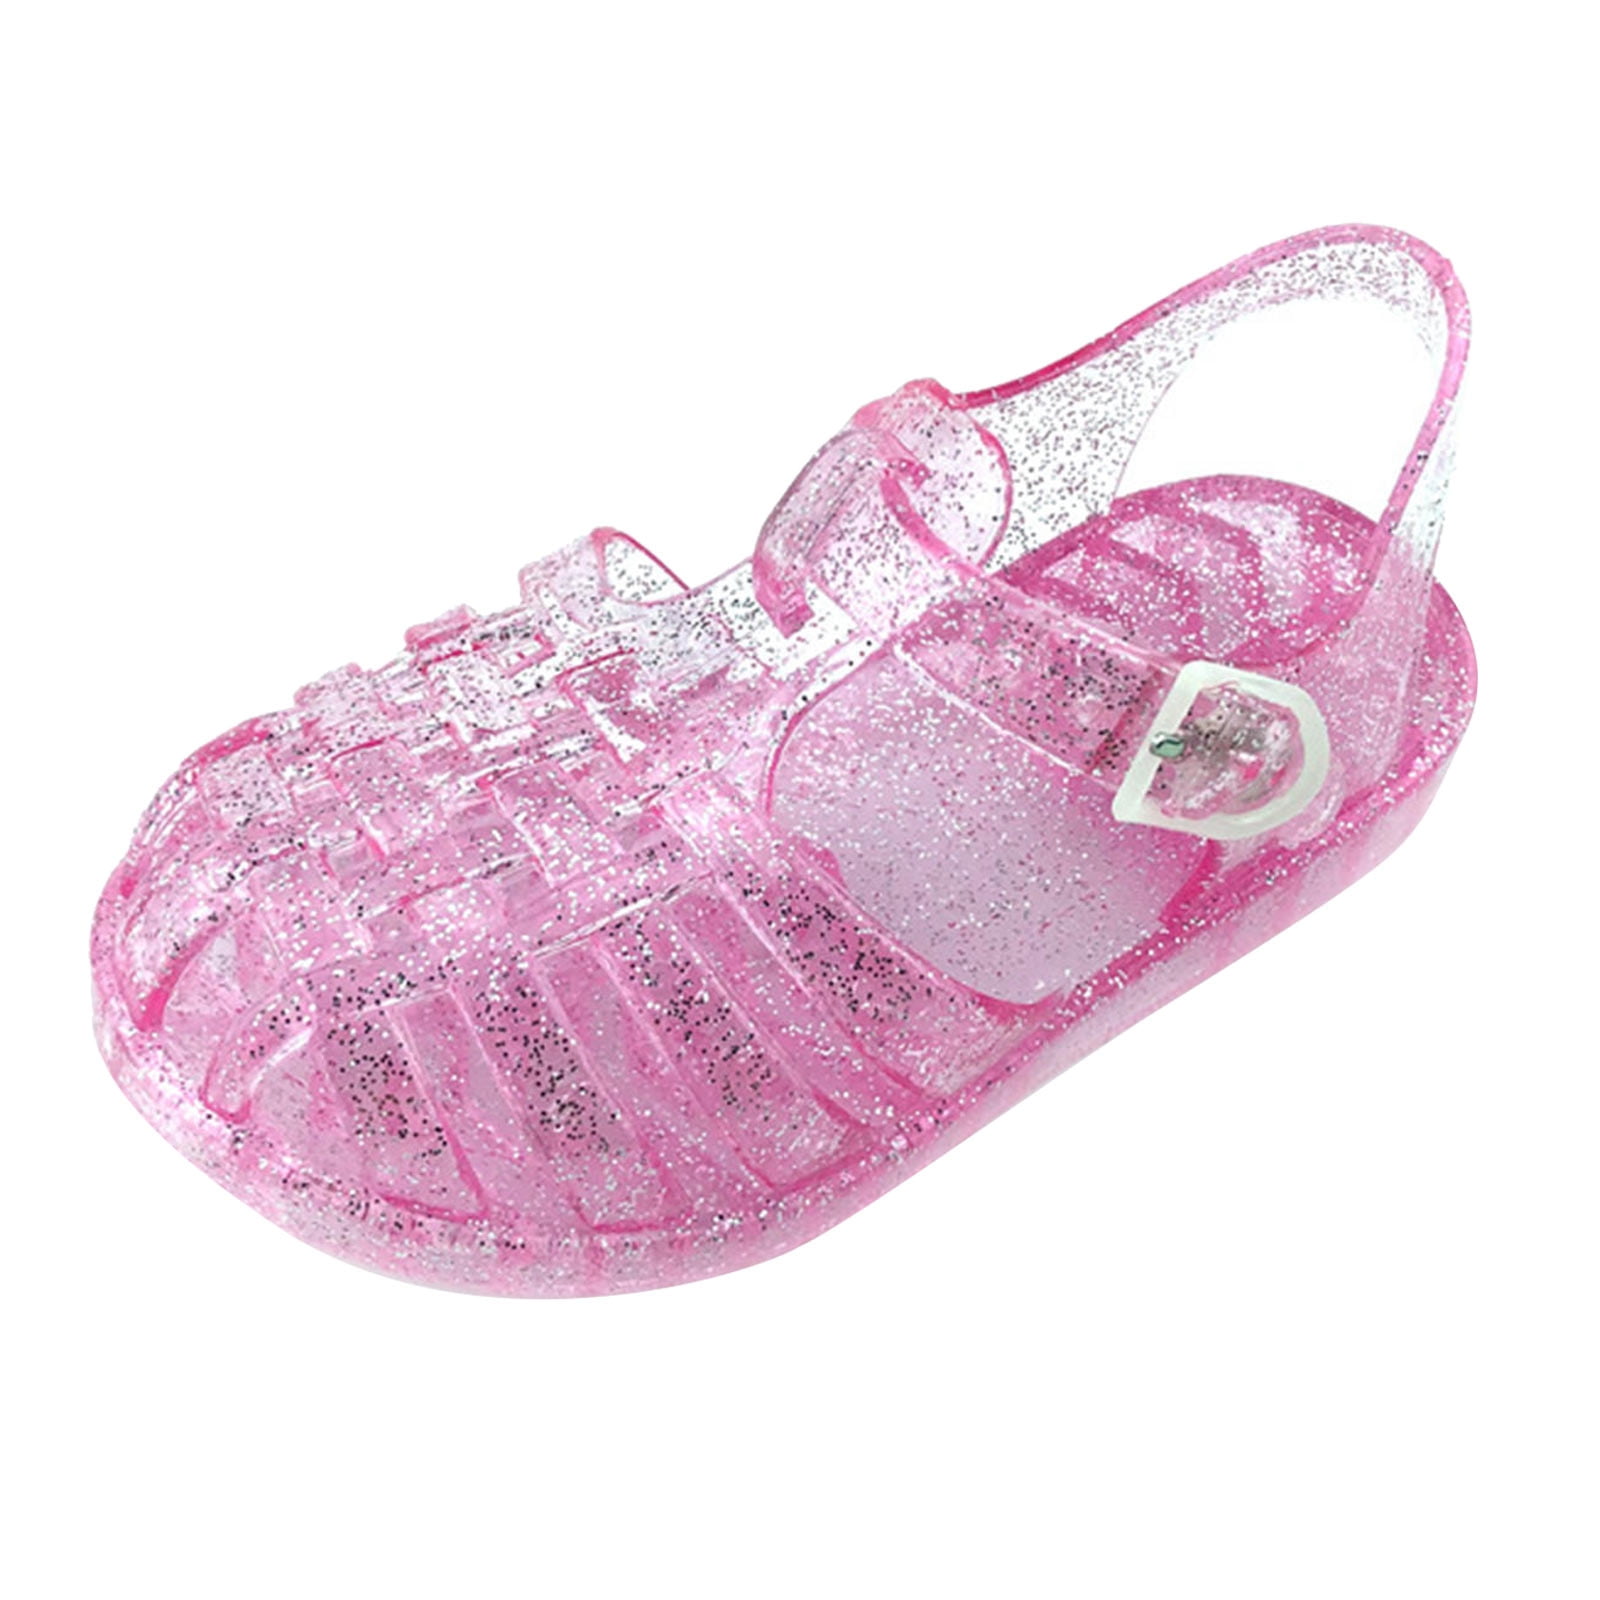 Oalirro - Selected Little Kid Girls Sandals PVC Fabric Closed Toe Beach  Shoes 4-8 Years Recommended Age: 5 Years